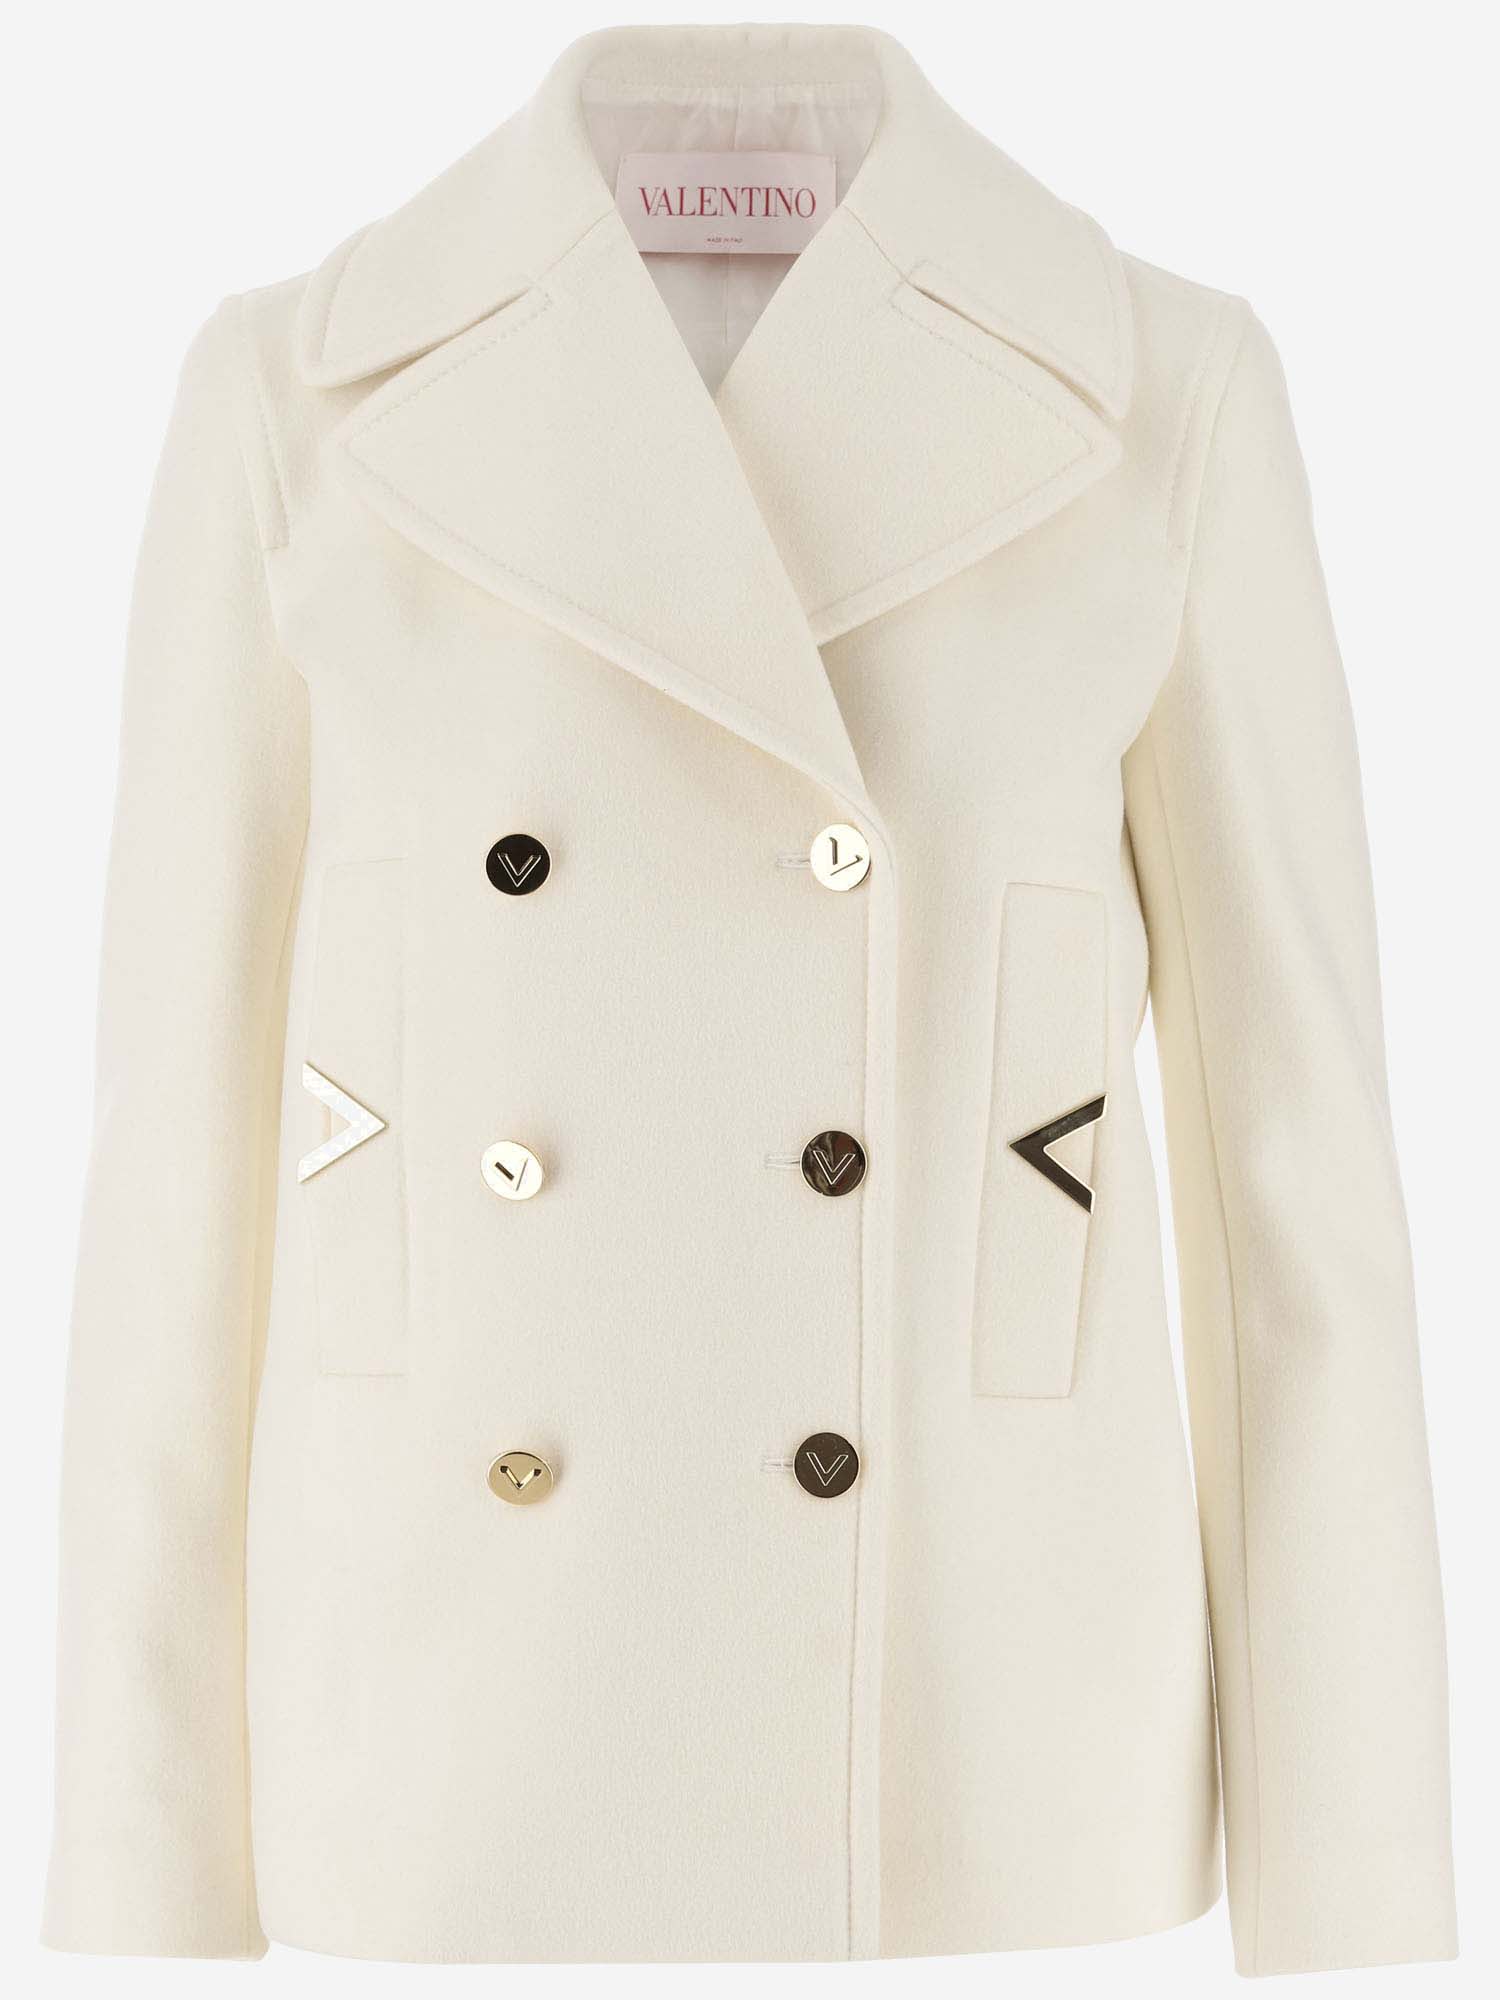 VALENTINO WOOL AND CASHMERE COAT WITH VLOGO